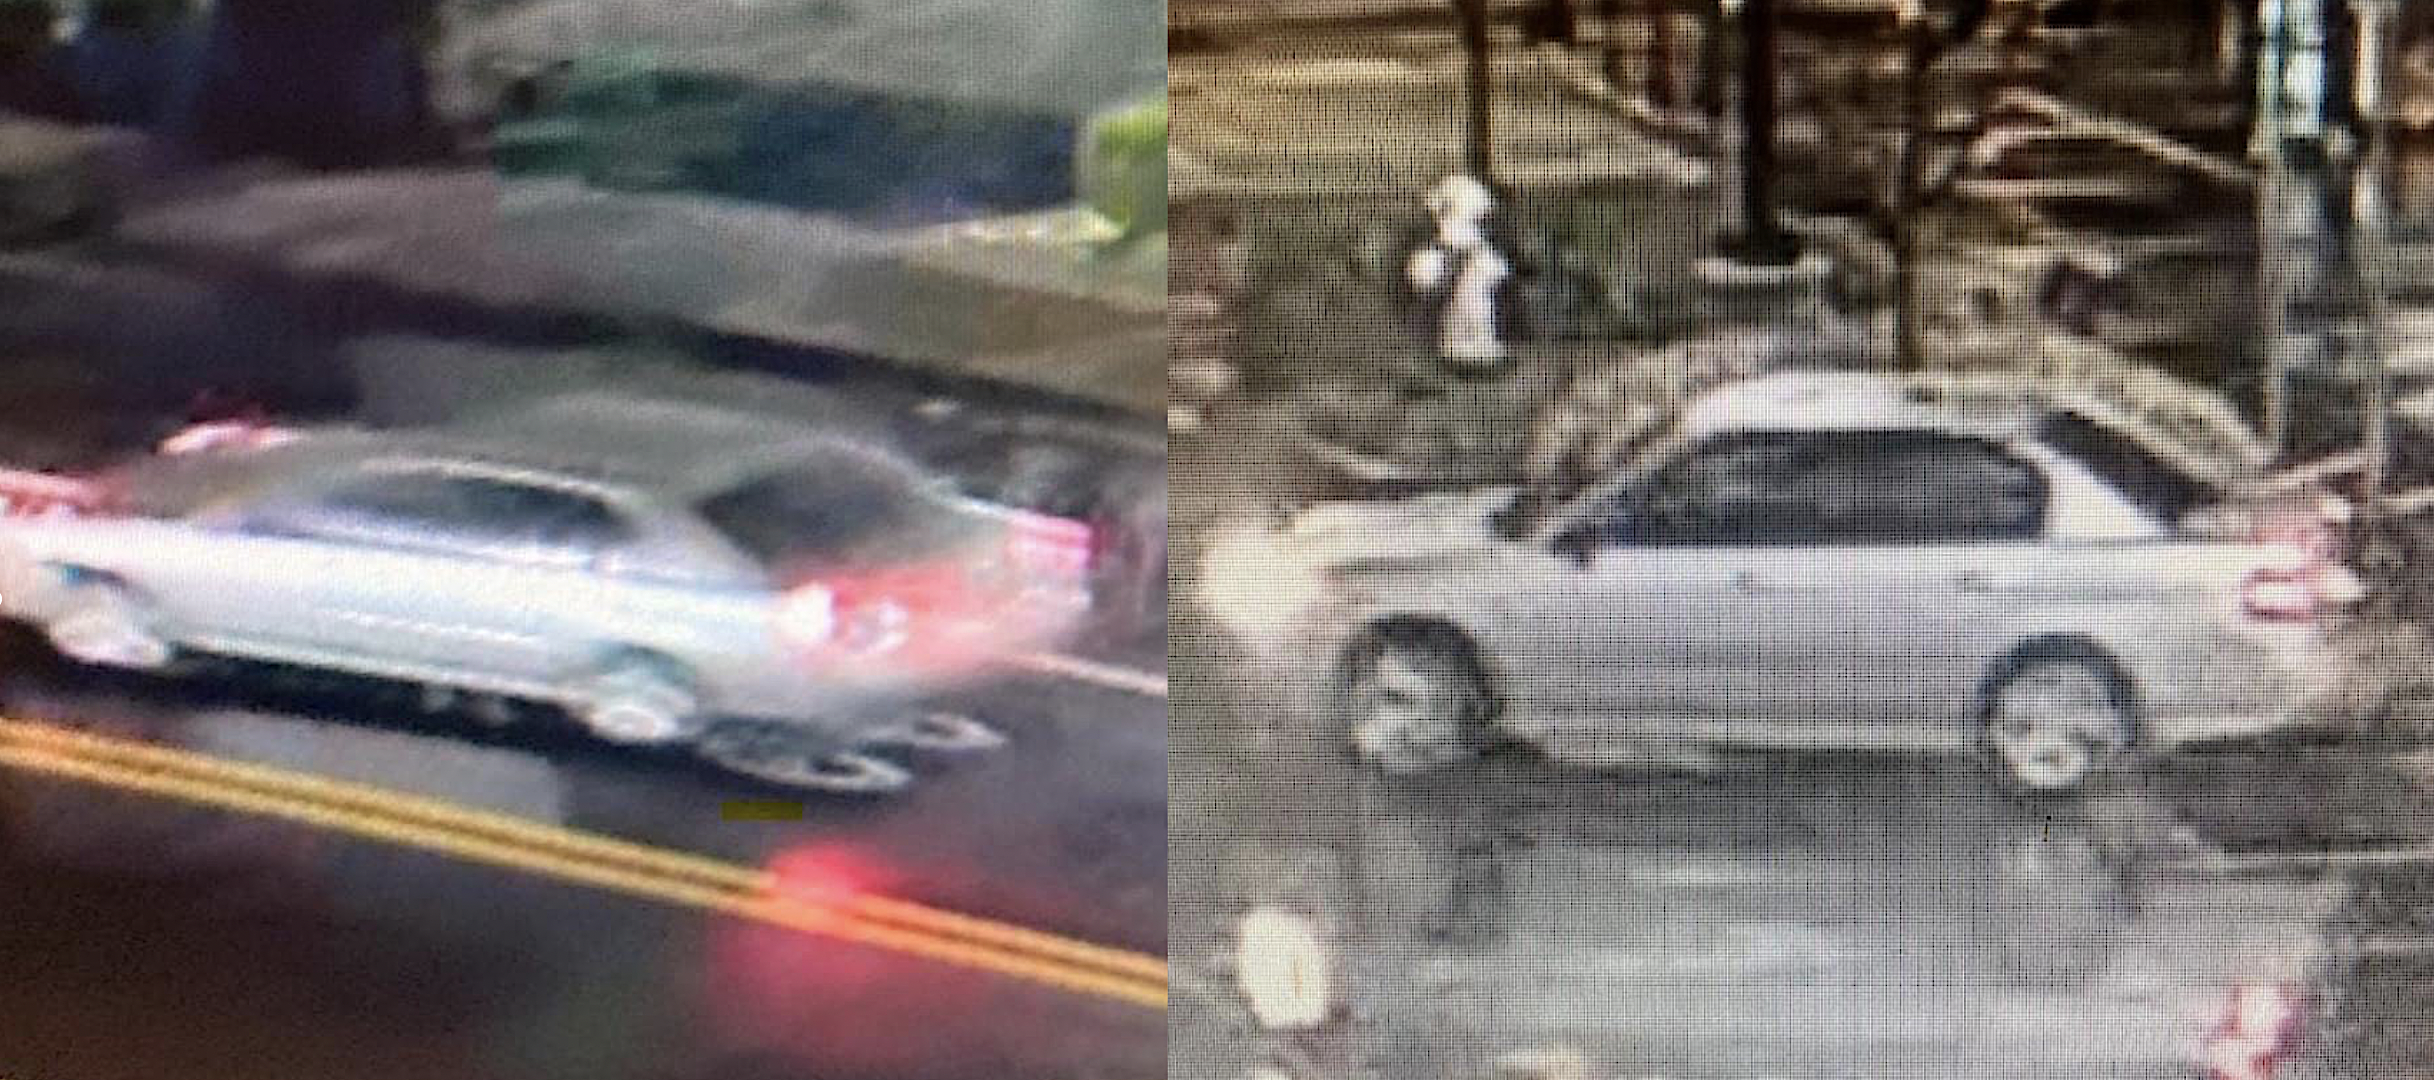 Public assistance sought in identifying vehicle that struck teen